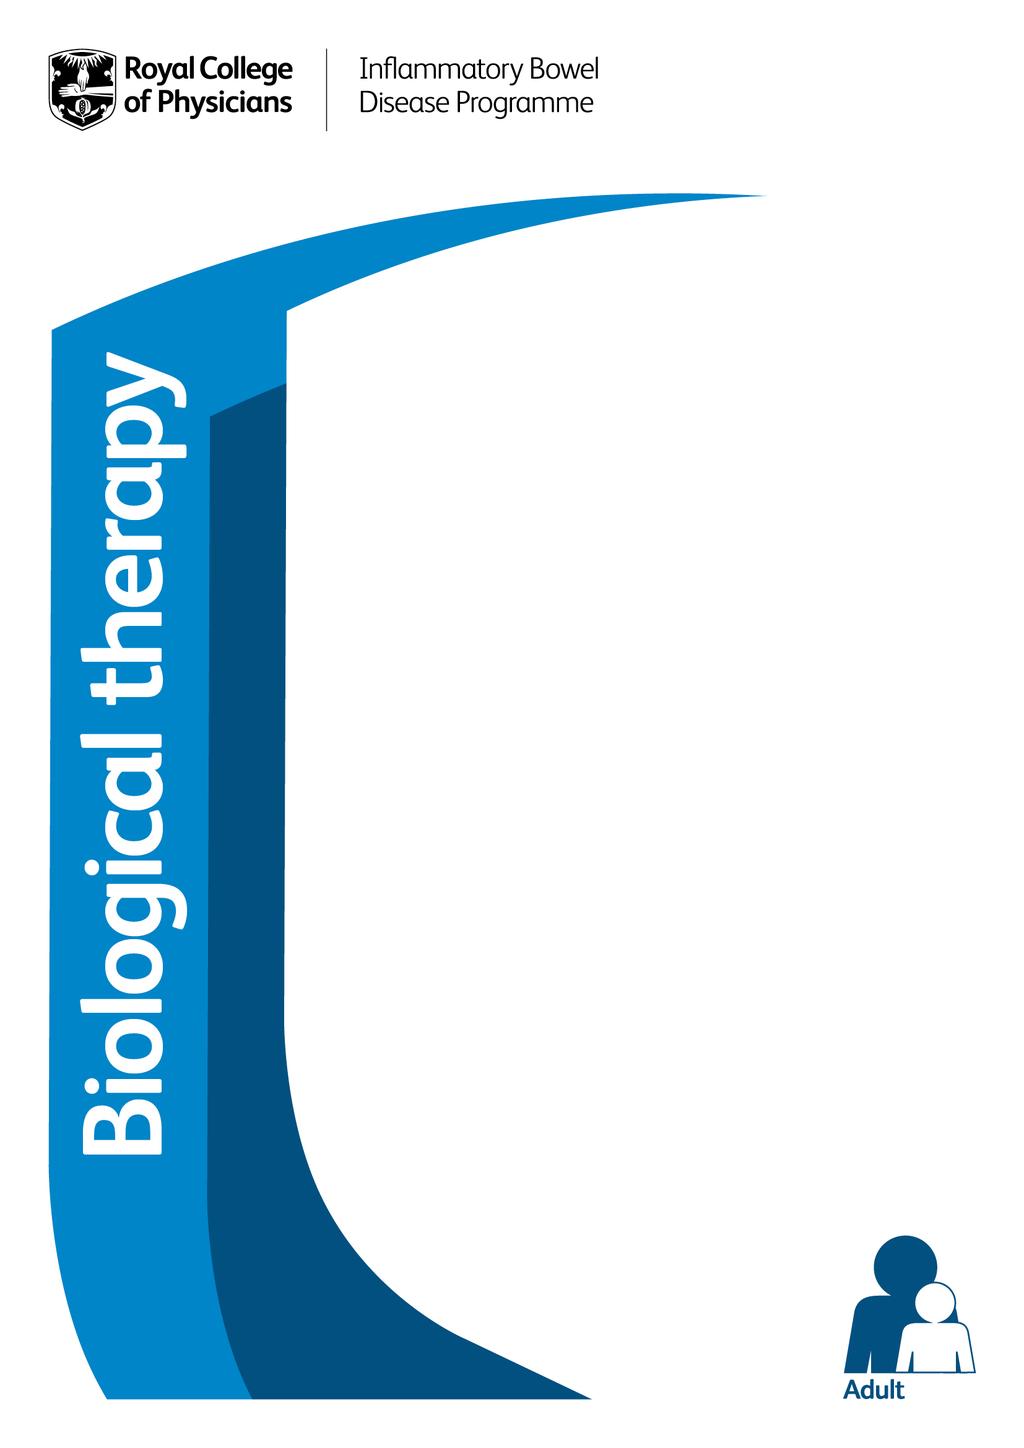 National clinical audit of biological therapies UK